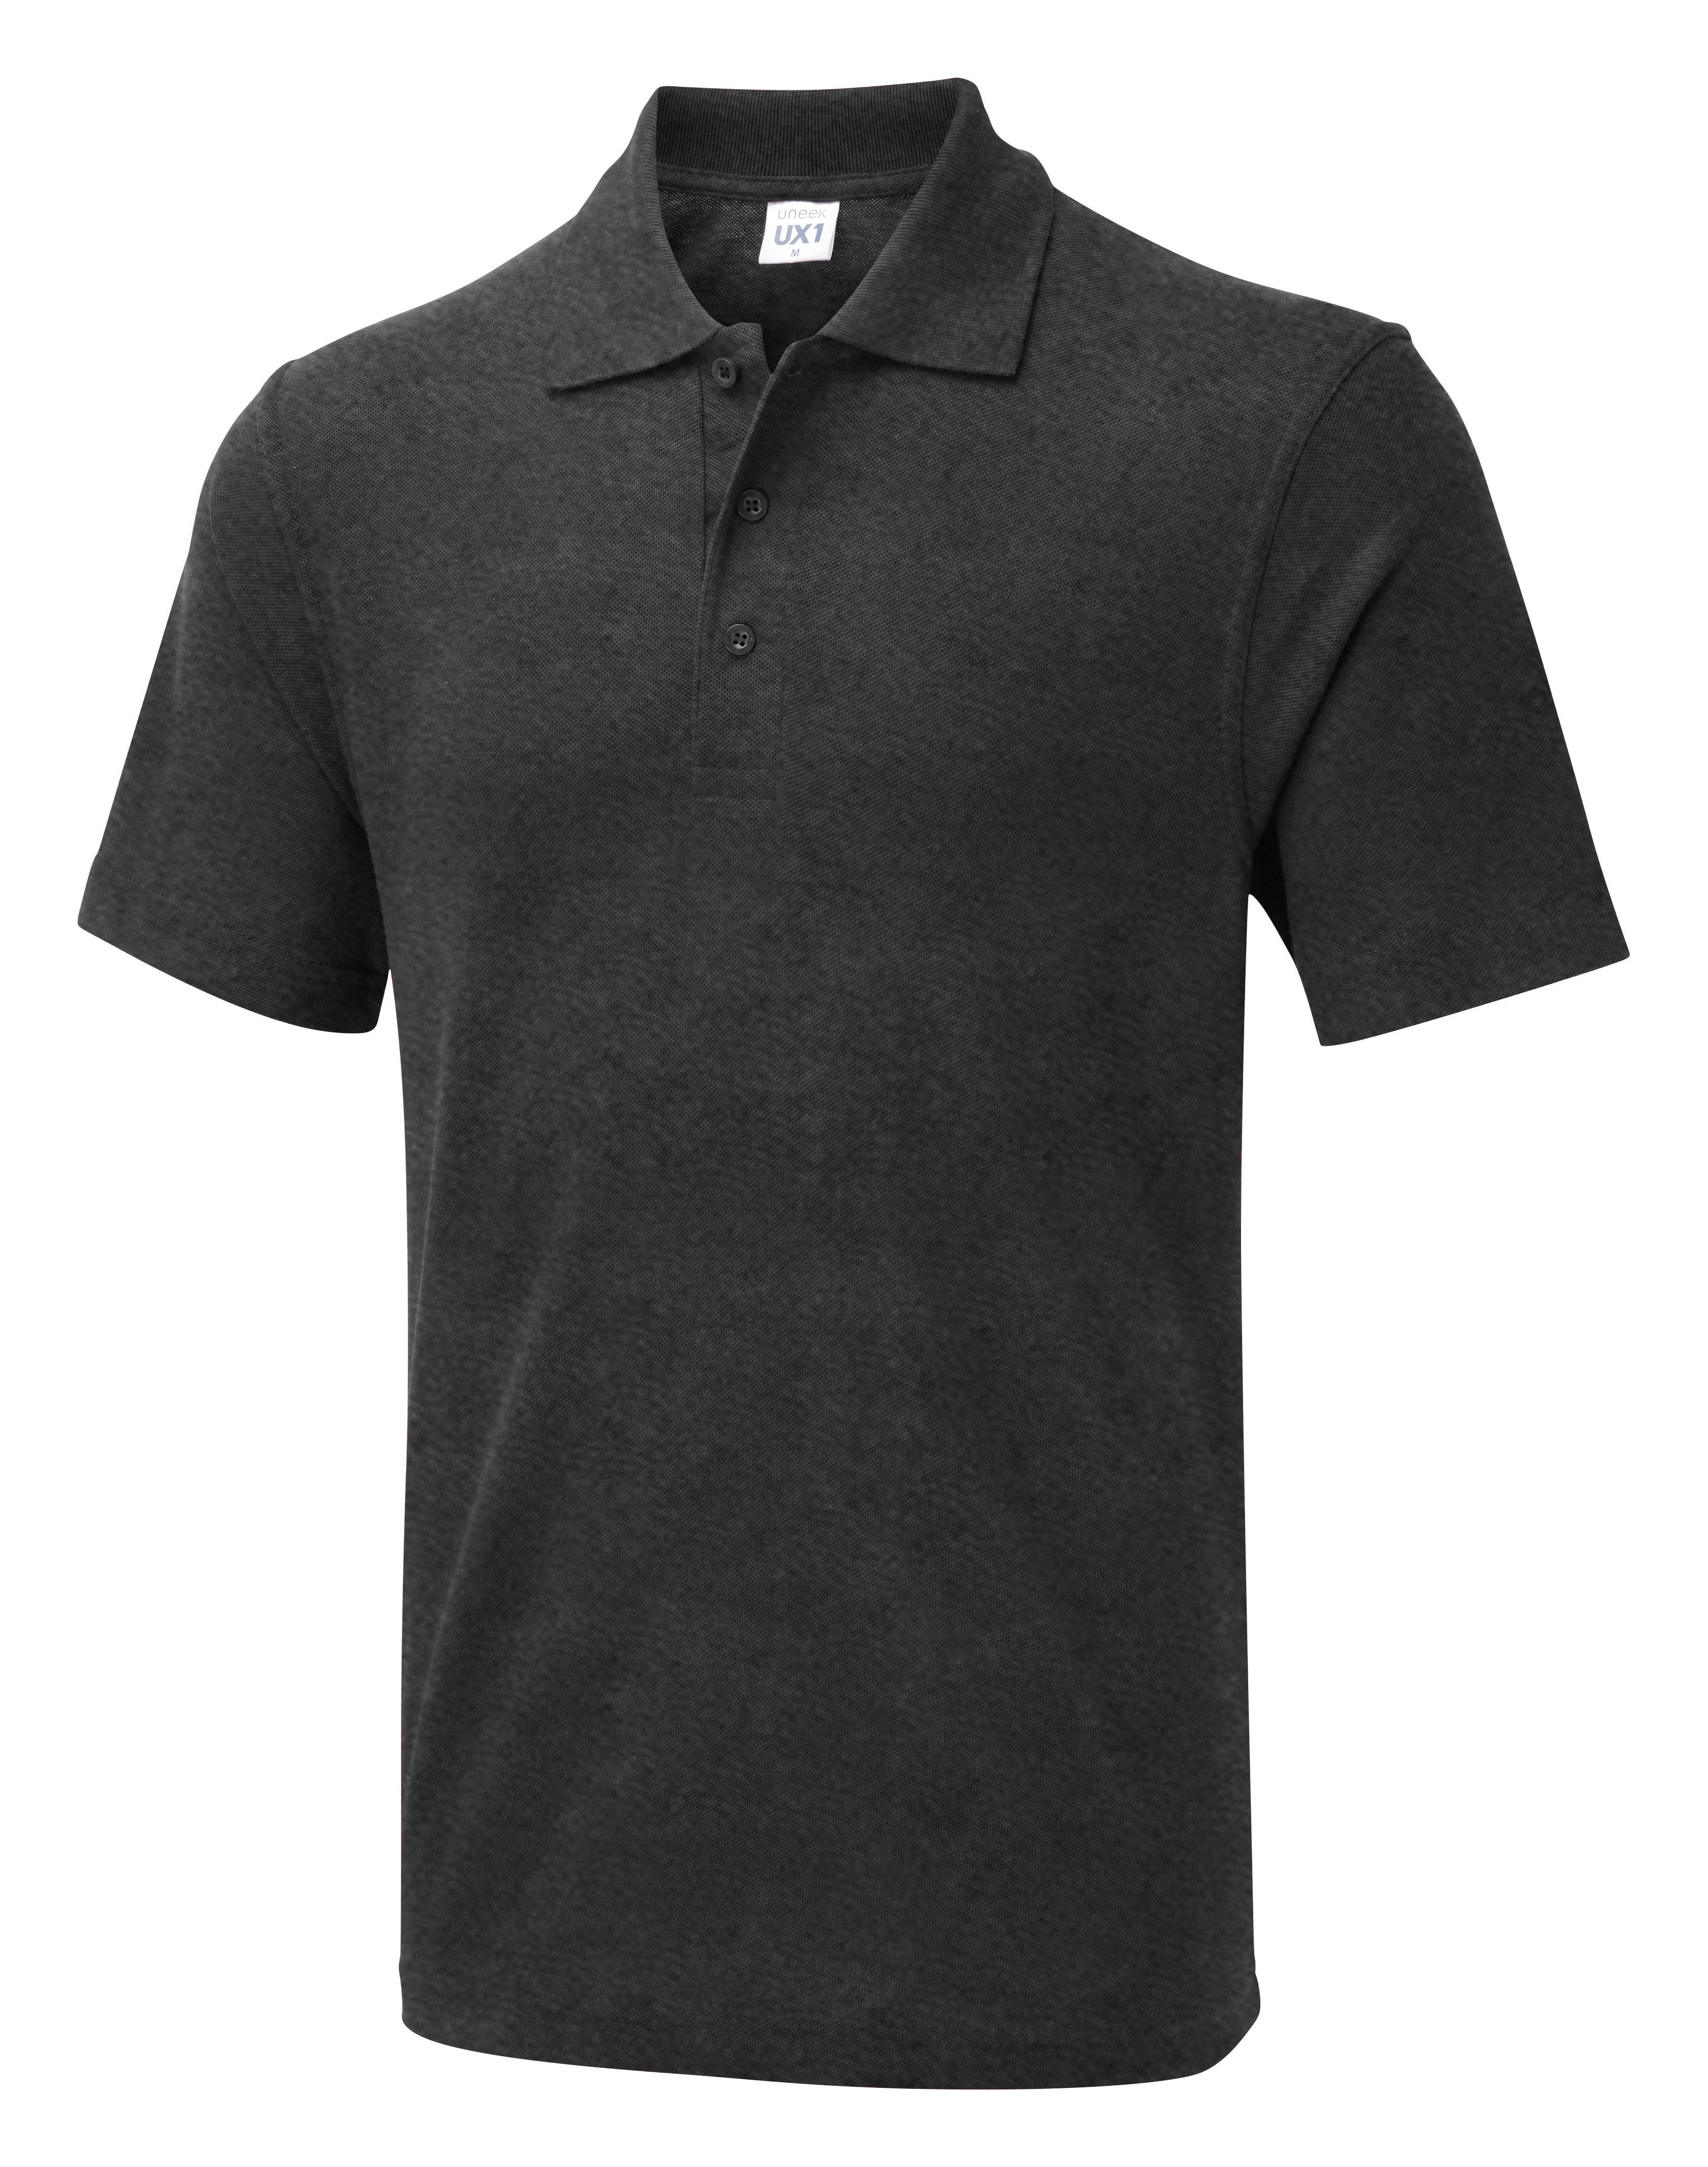 Uneek The UX Polo - ux1 (Charcoal)